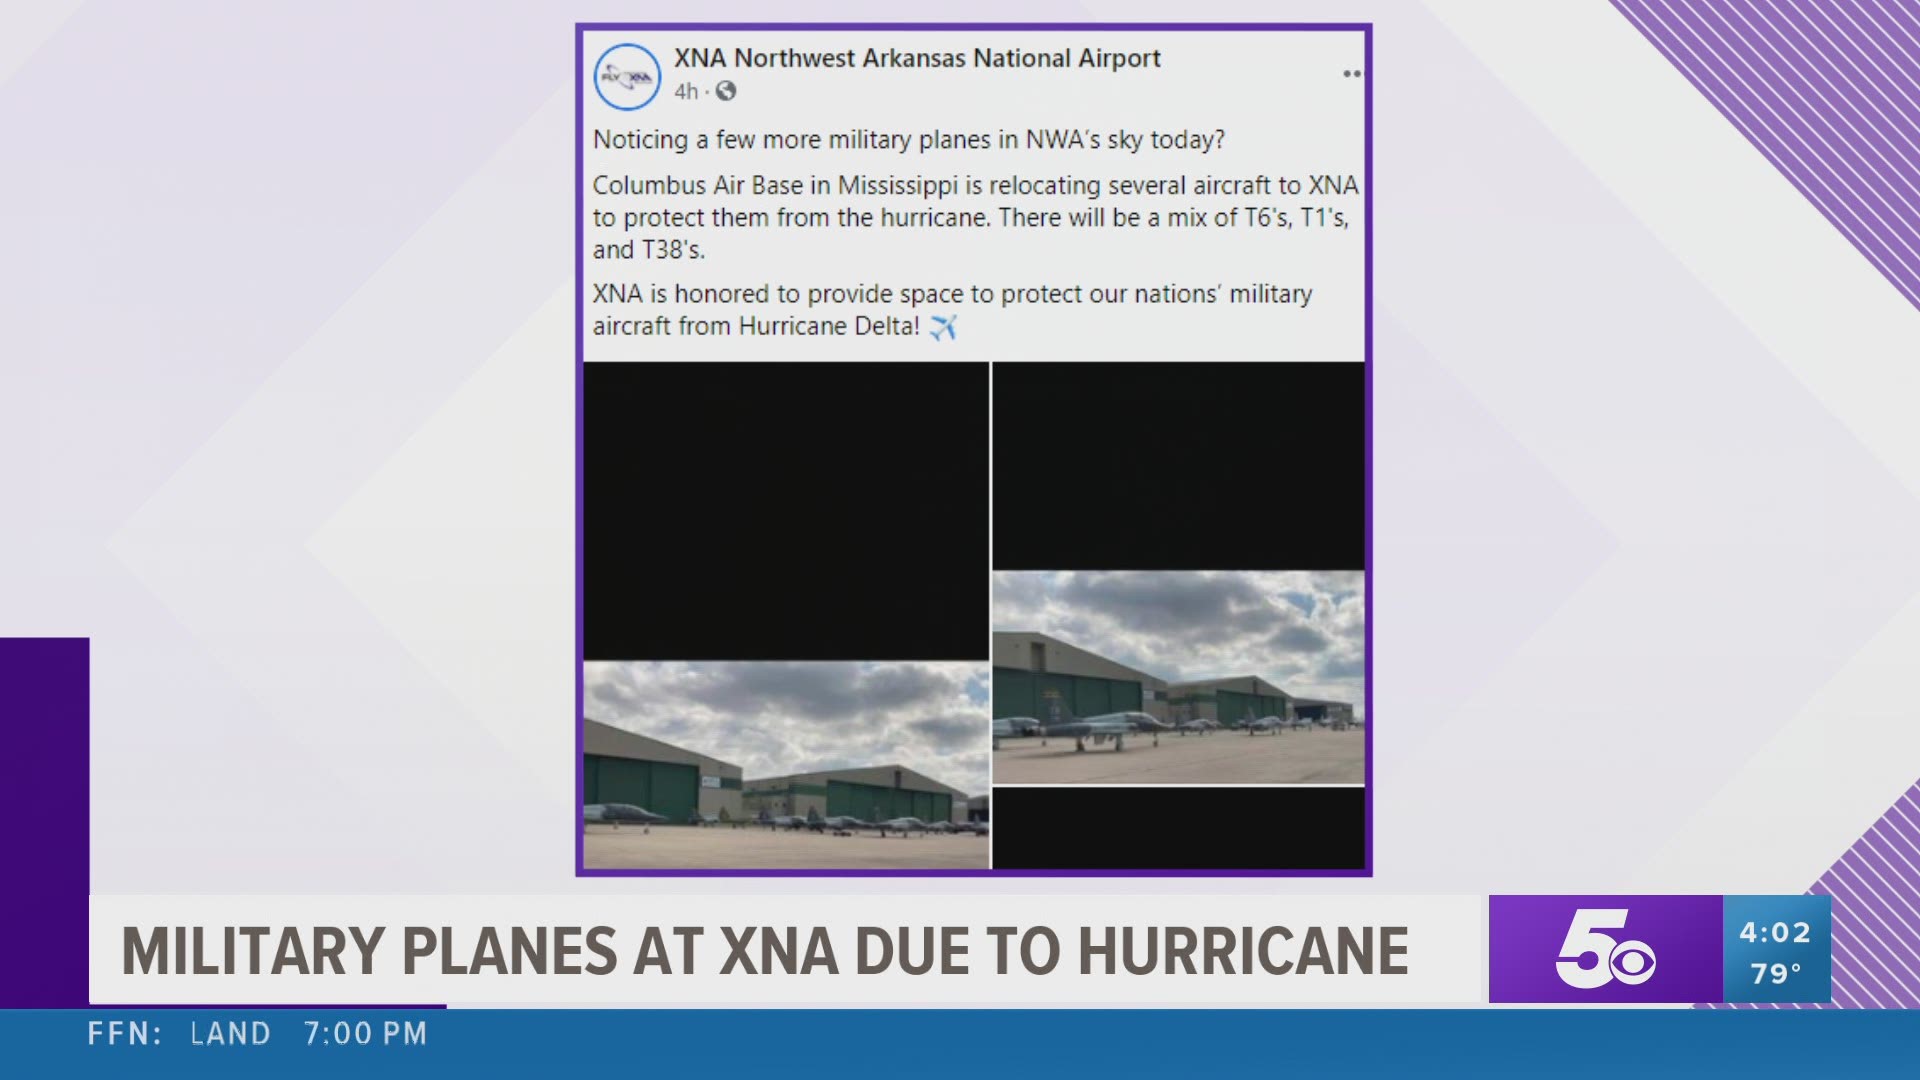 Military planes at XNA due to hurricane